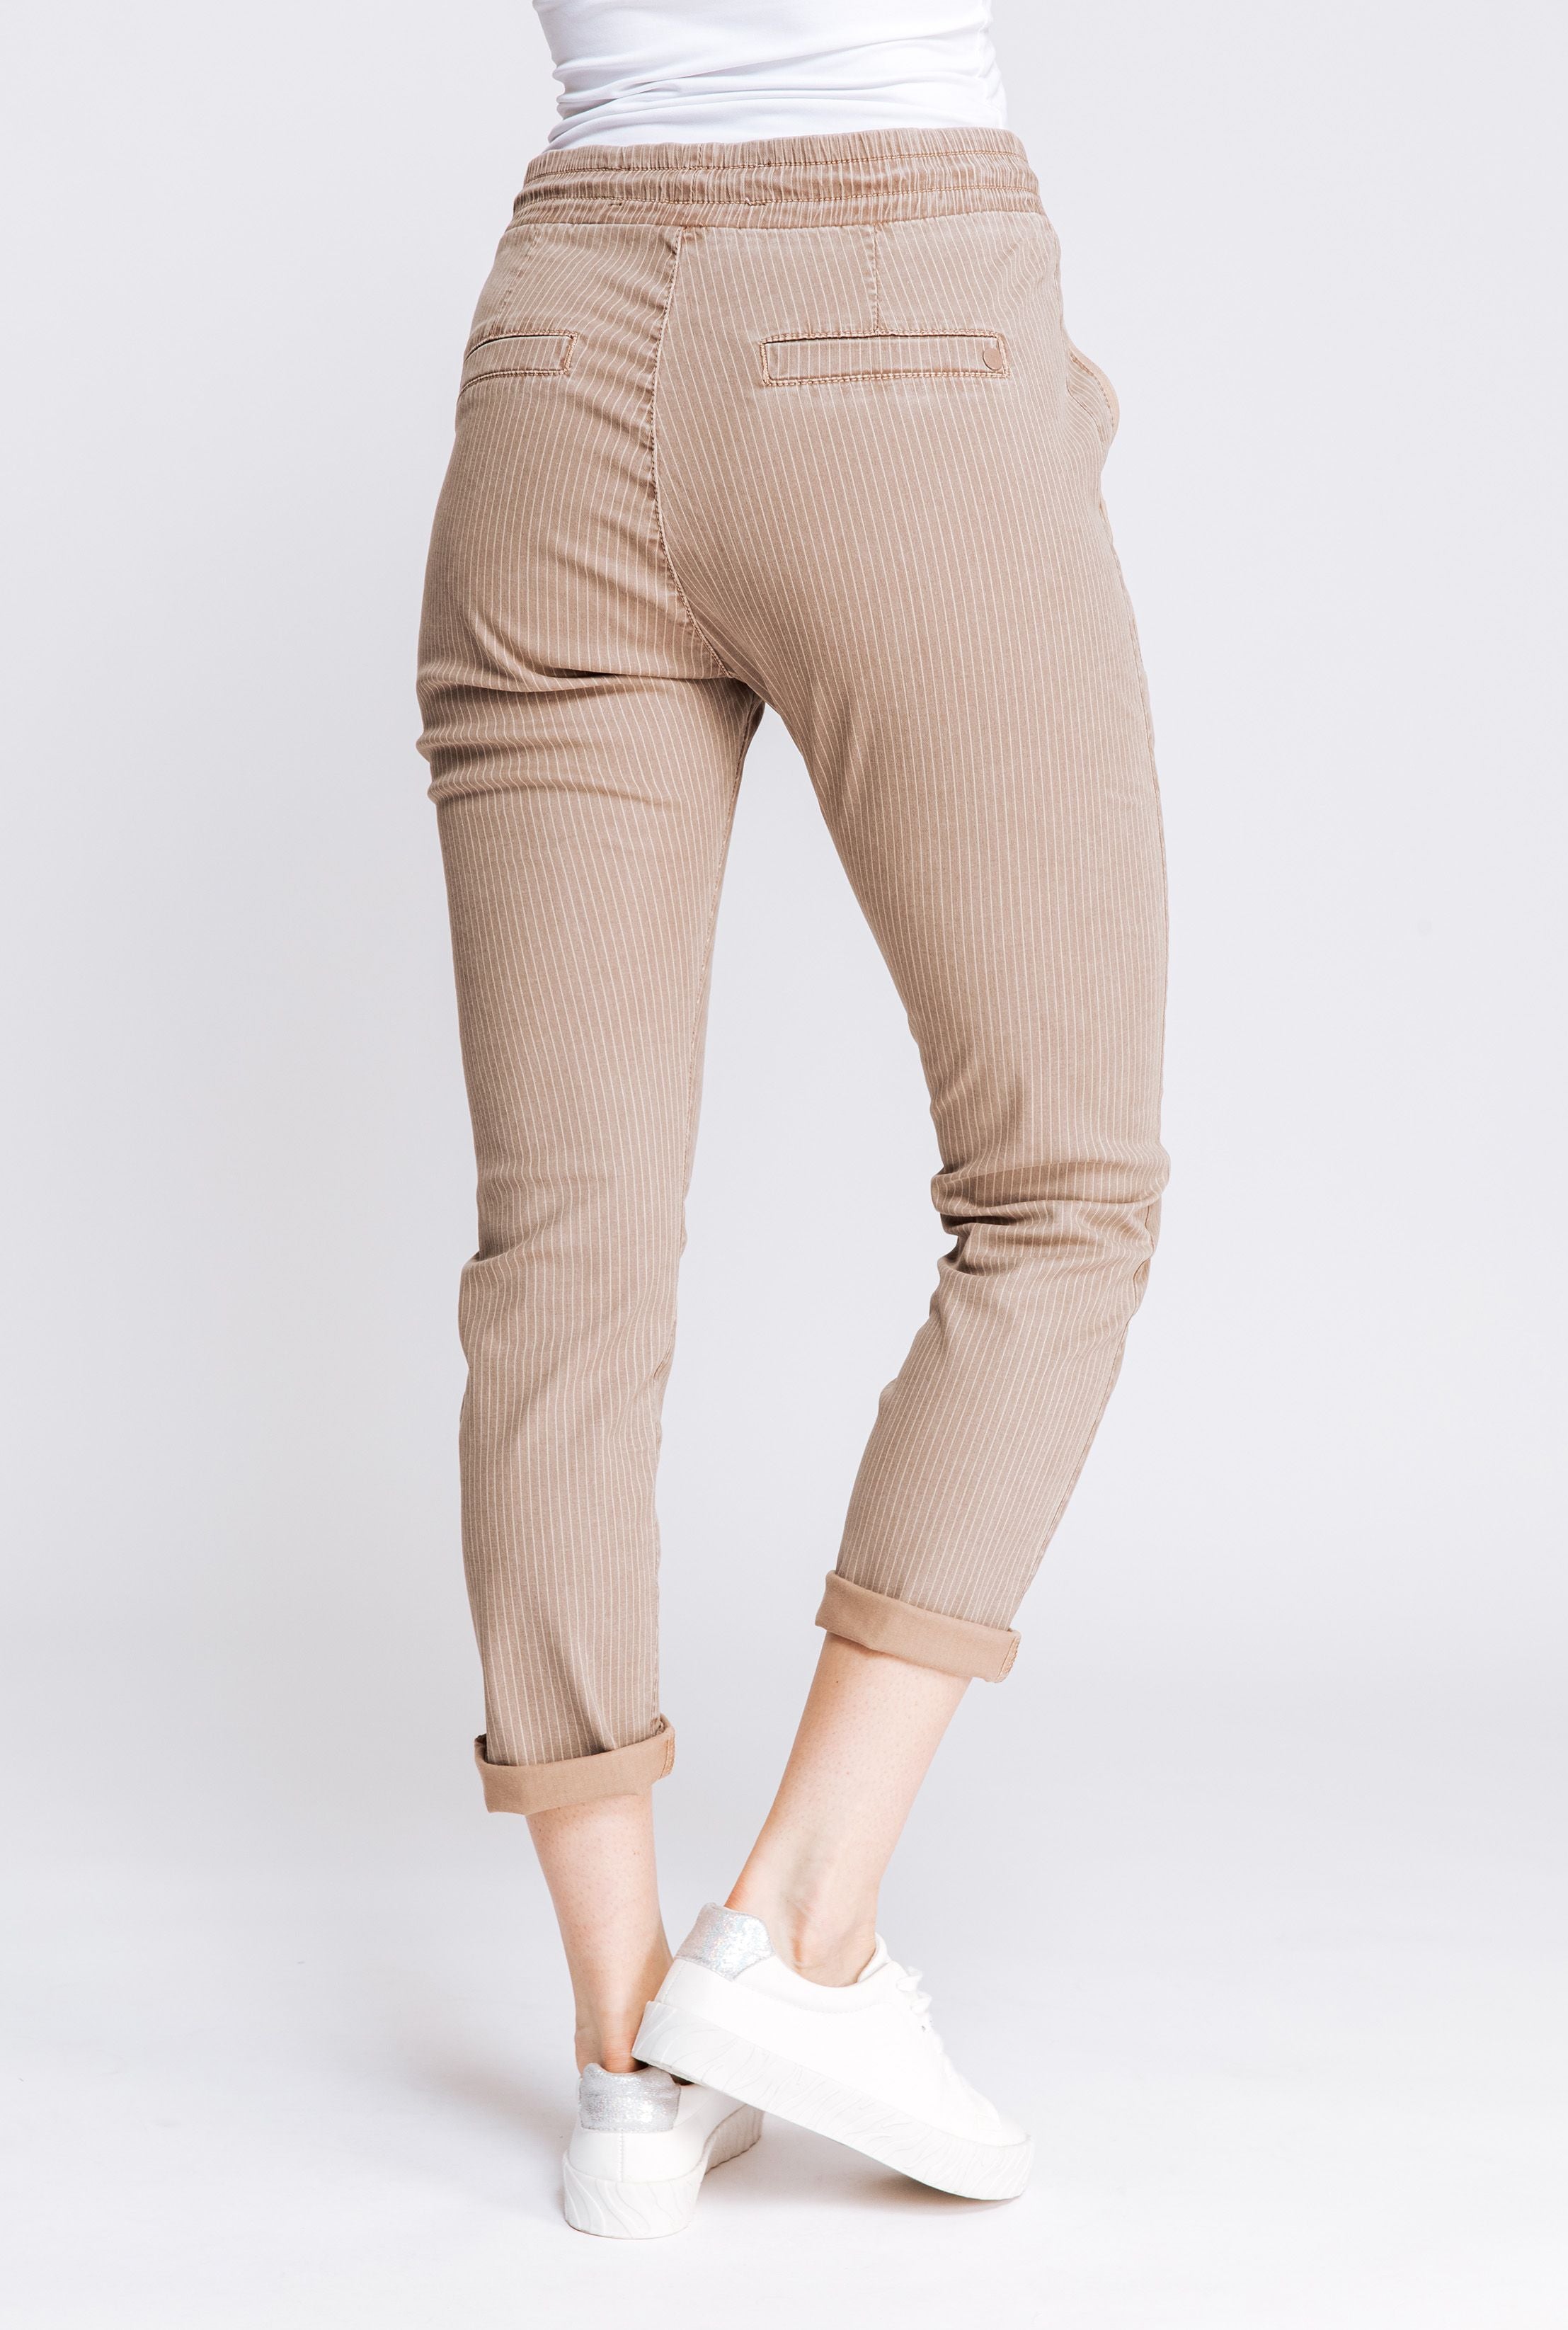 Zhrill Fabia Pant - Taupe Striped